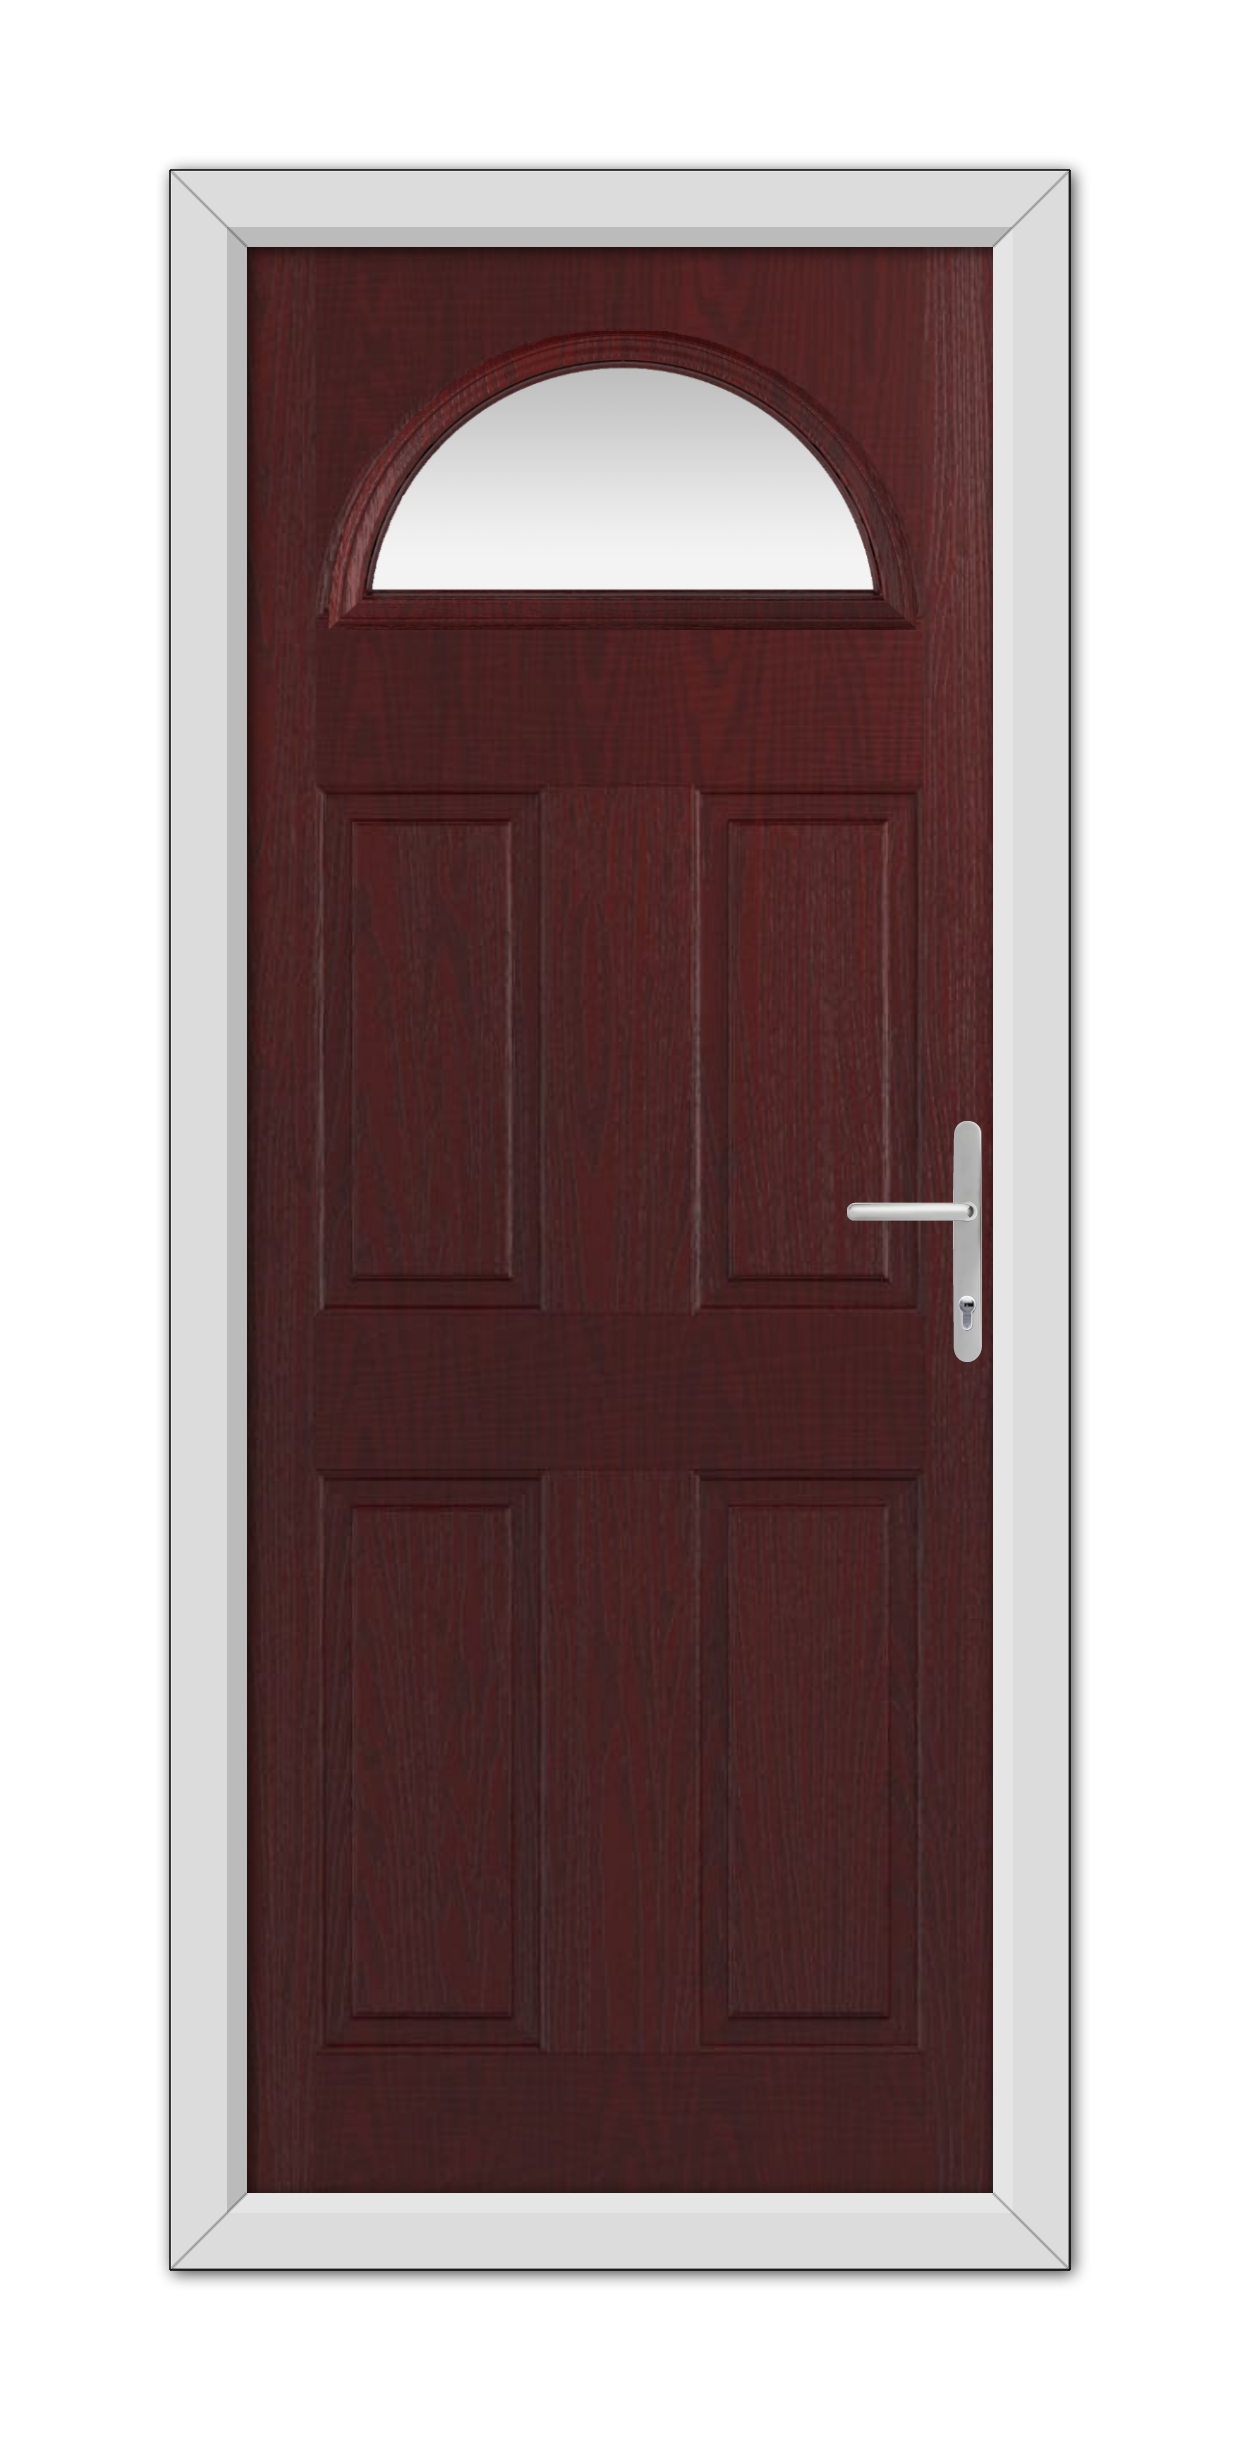 A Rosewood Winslow 1 Composite Door 48mm Timber Core with six panels and a rounded top, featuring a modern white handle, set in a simple white frame.